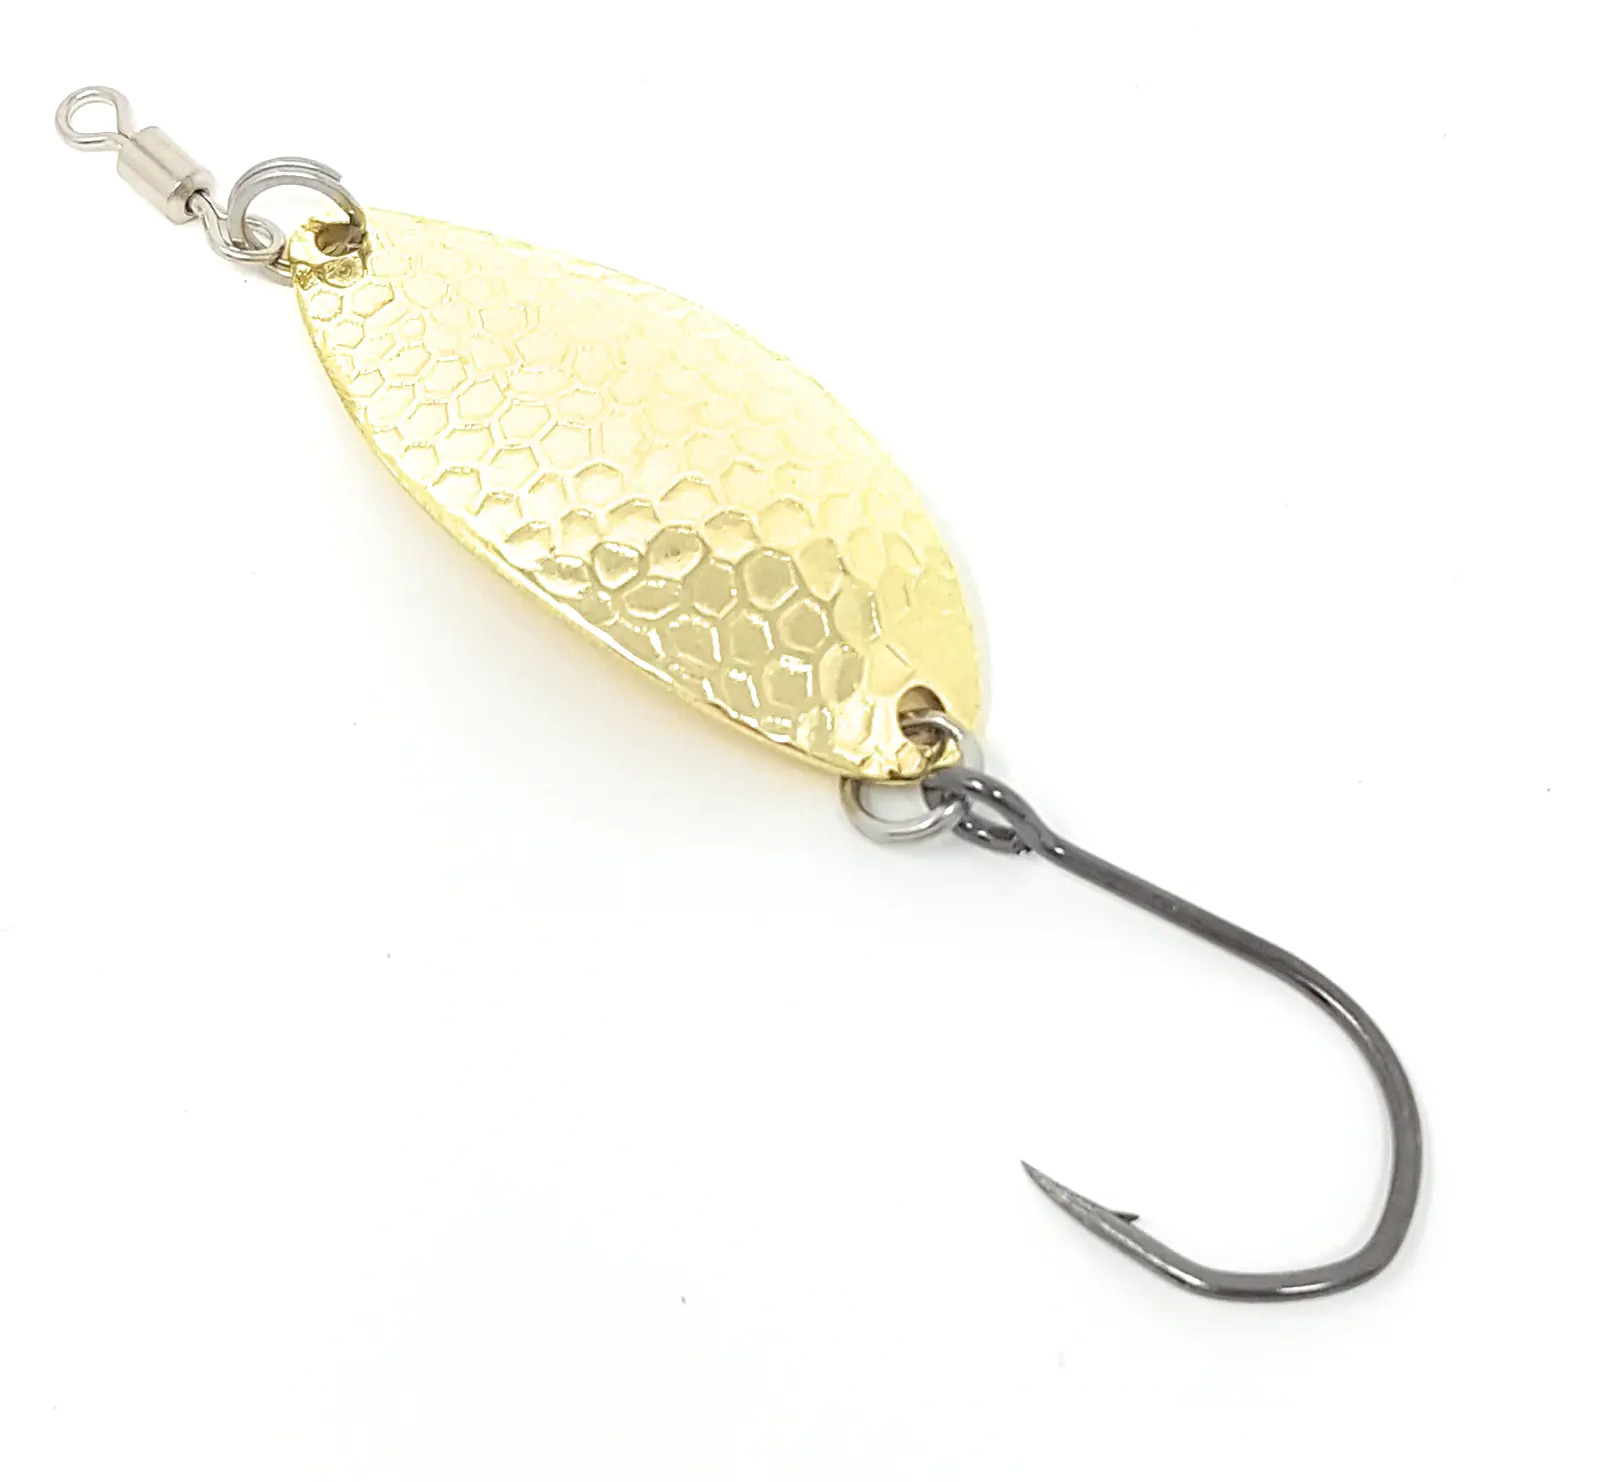 Prime Lures The Wiggler Spoon – Sea-Run Fly & Tackle